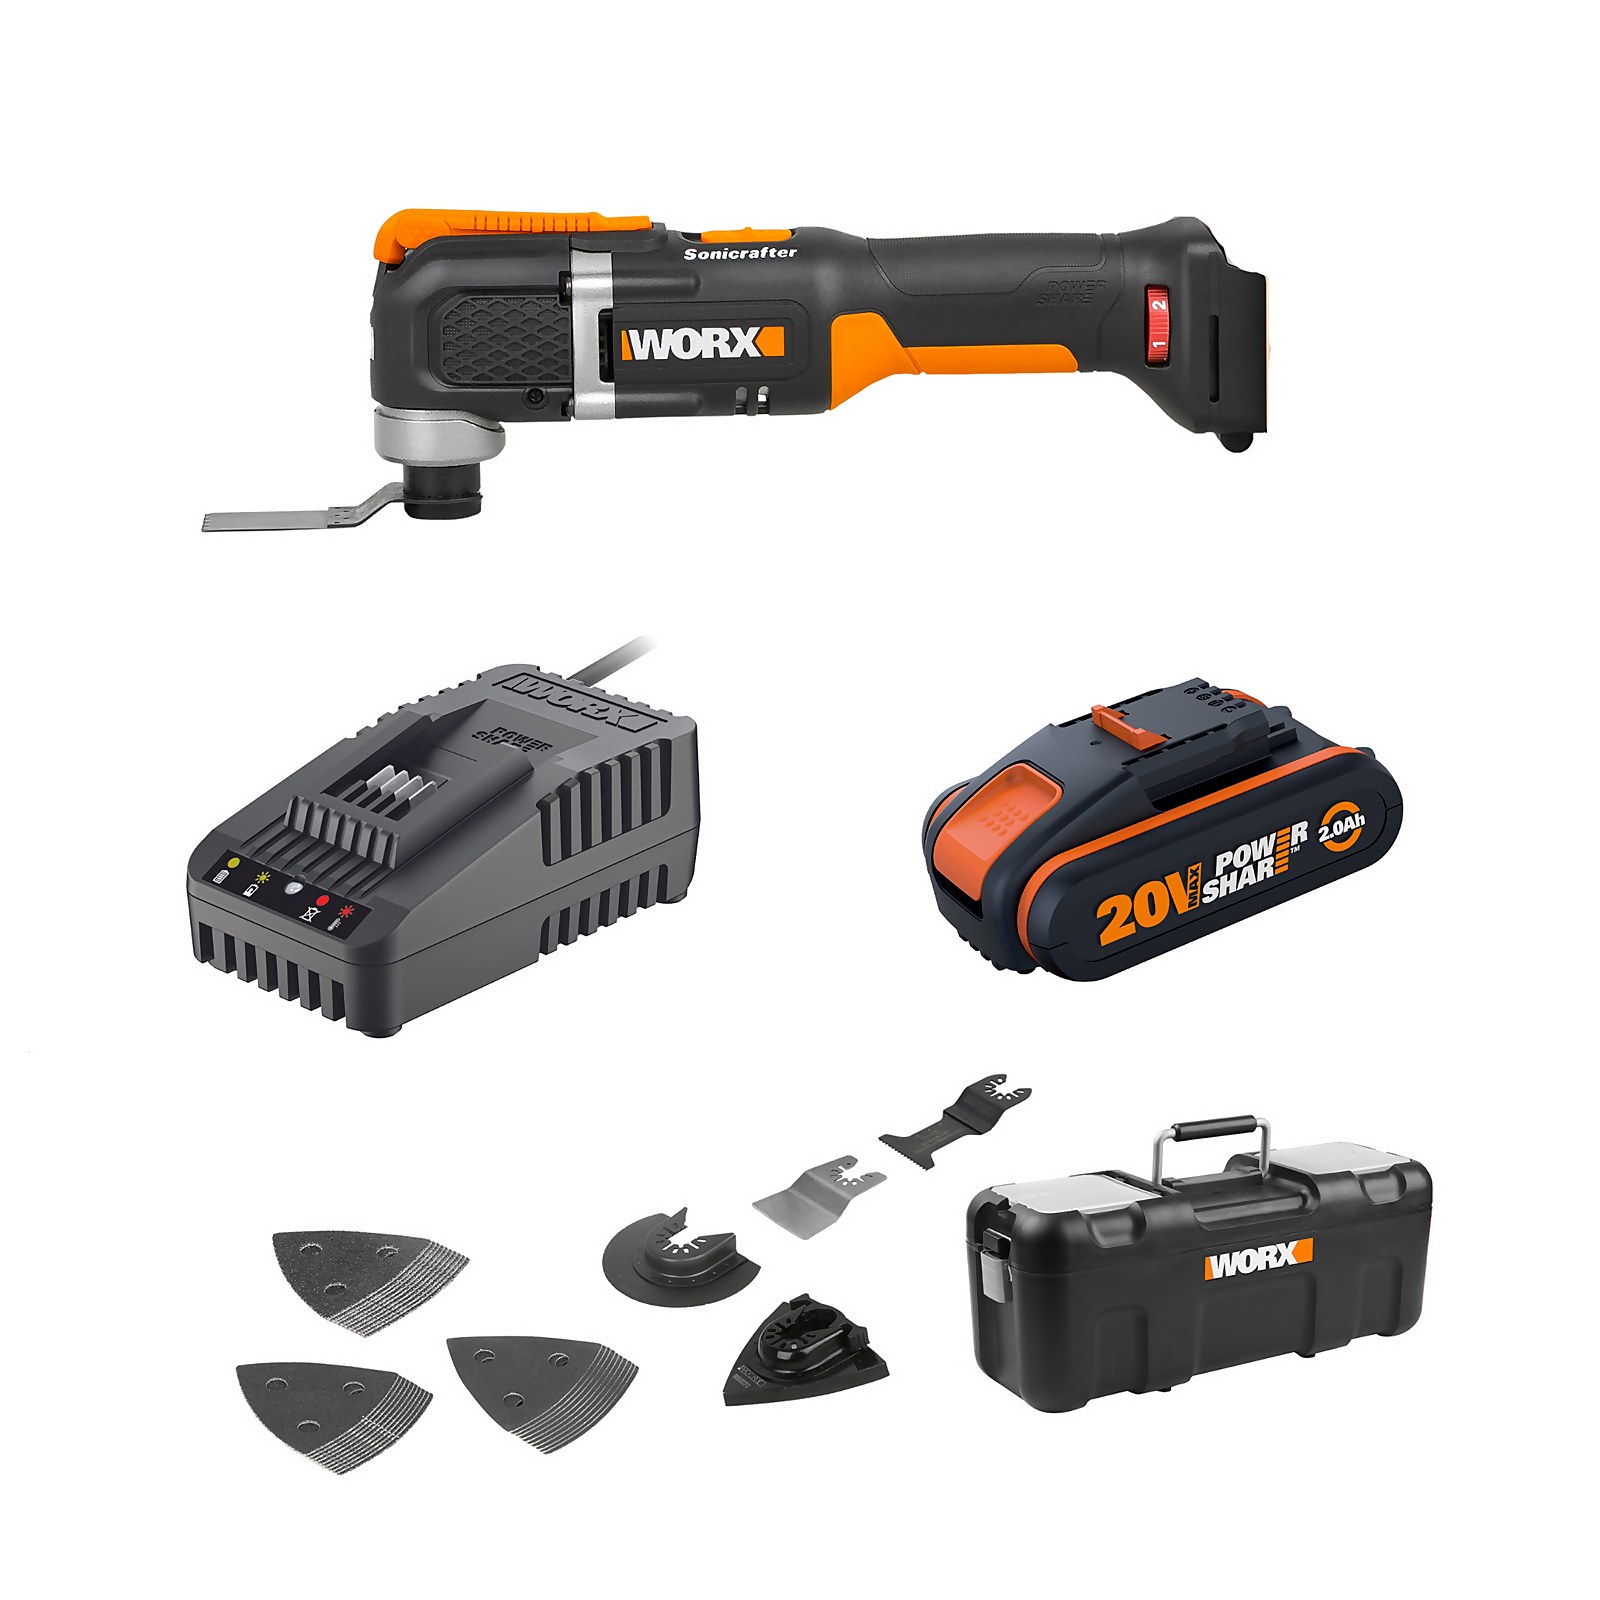 Worx WX696 20v 2.0Ah Sonicrafter Cordless Oscillating Multi Tool